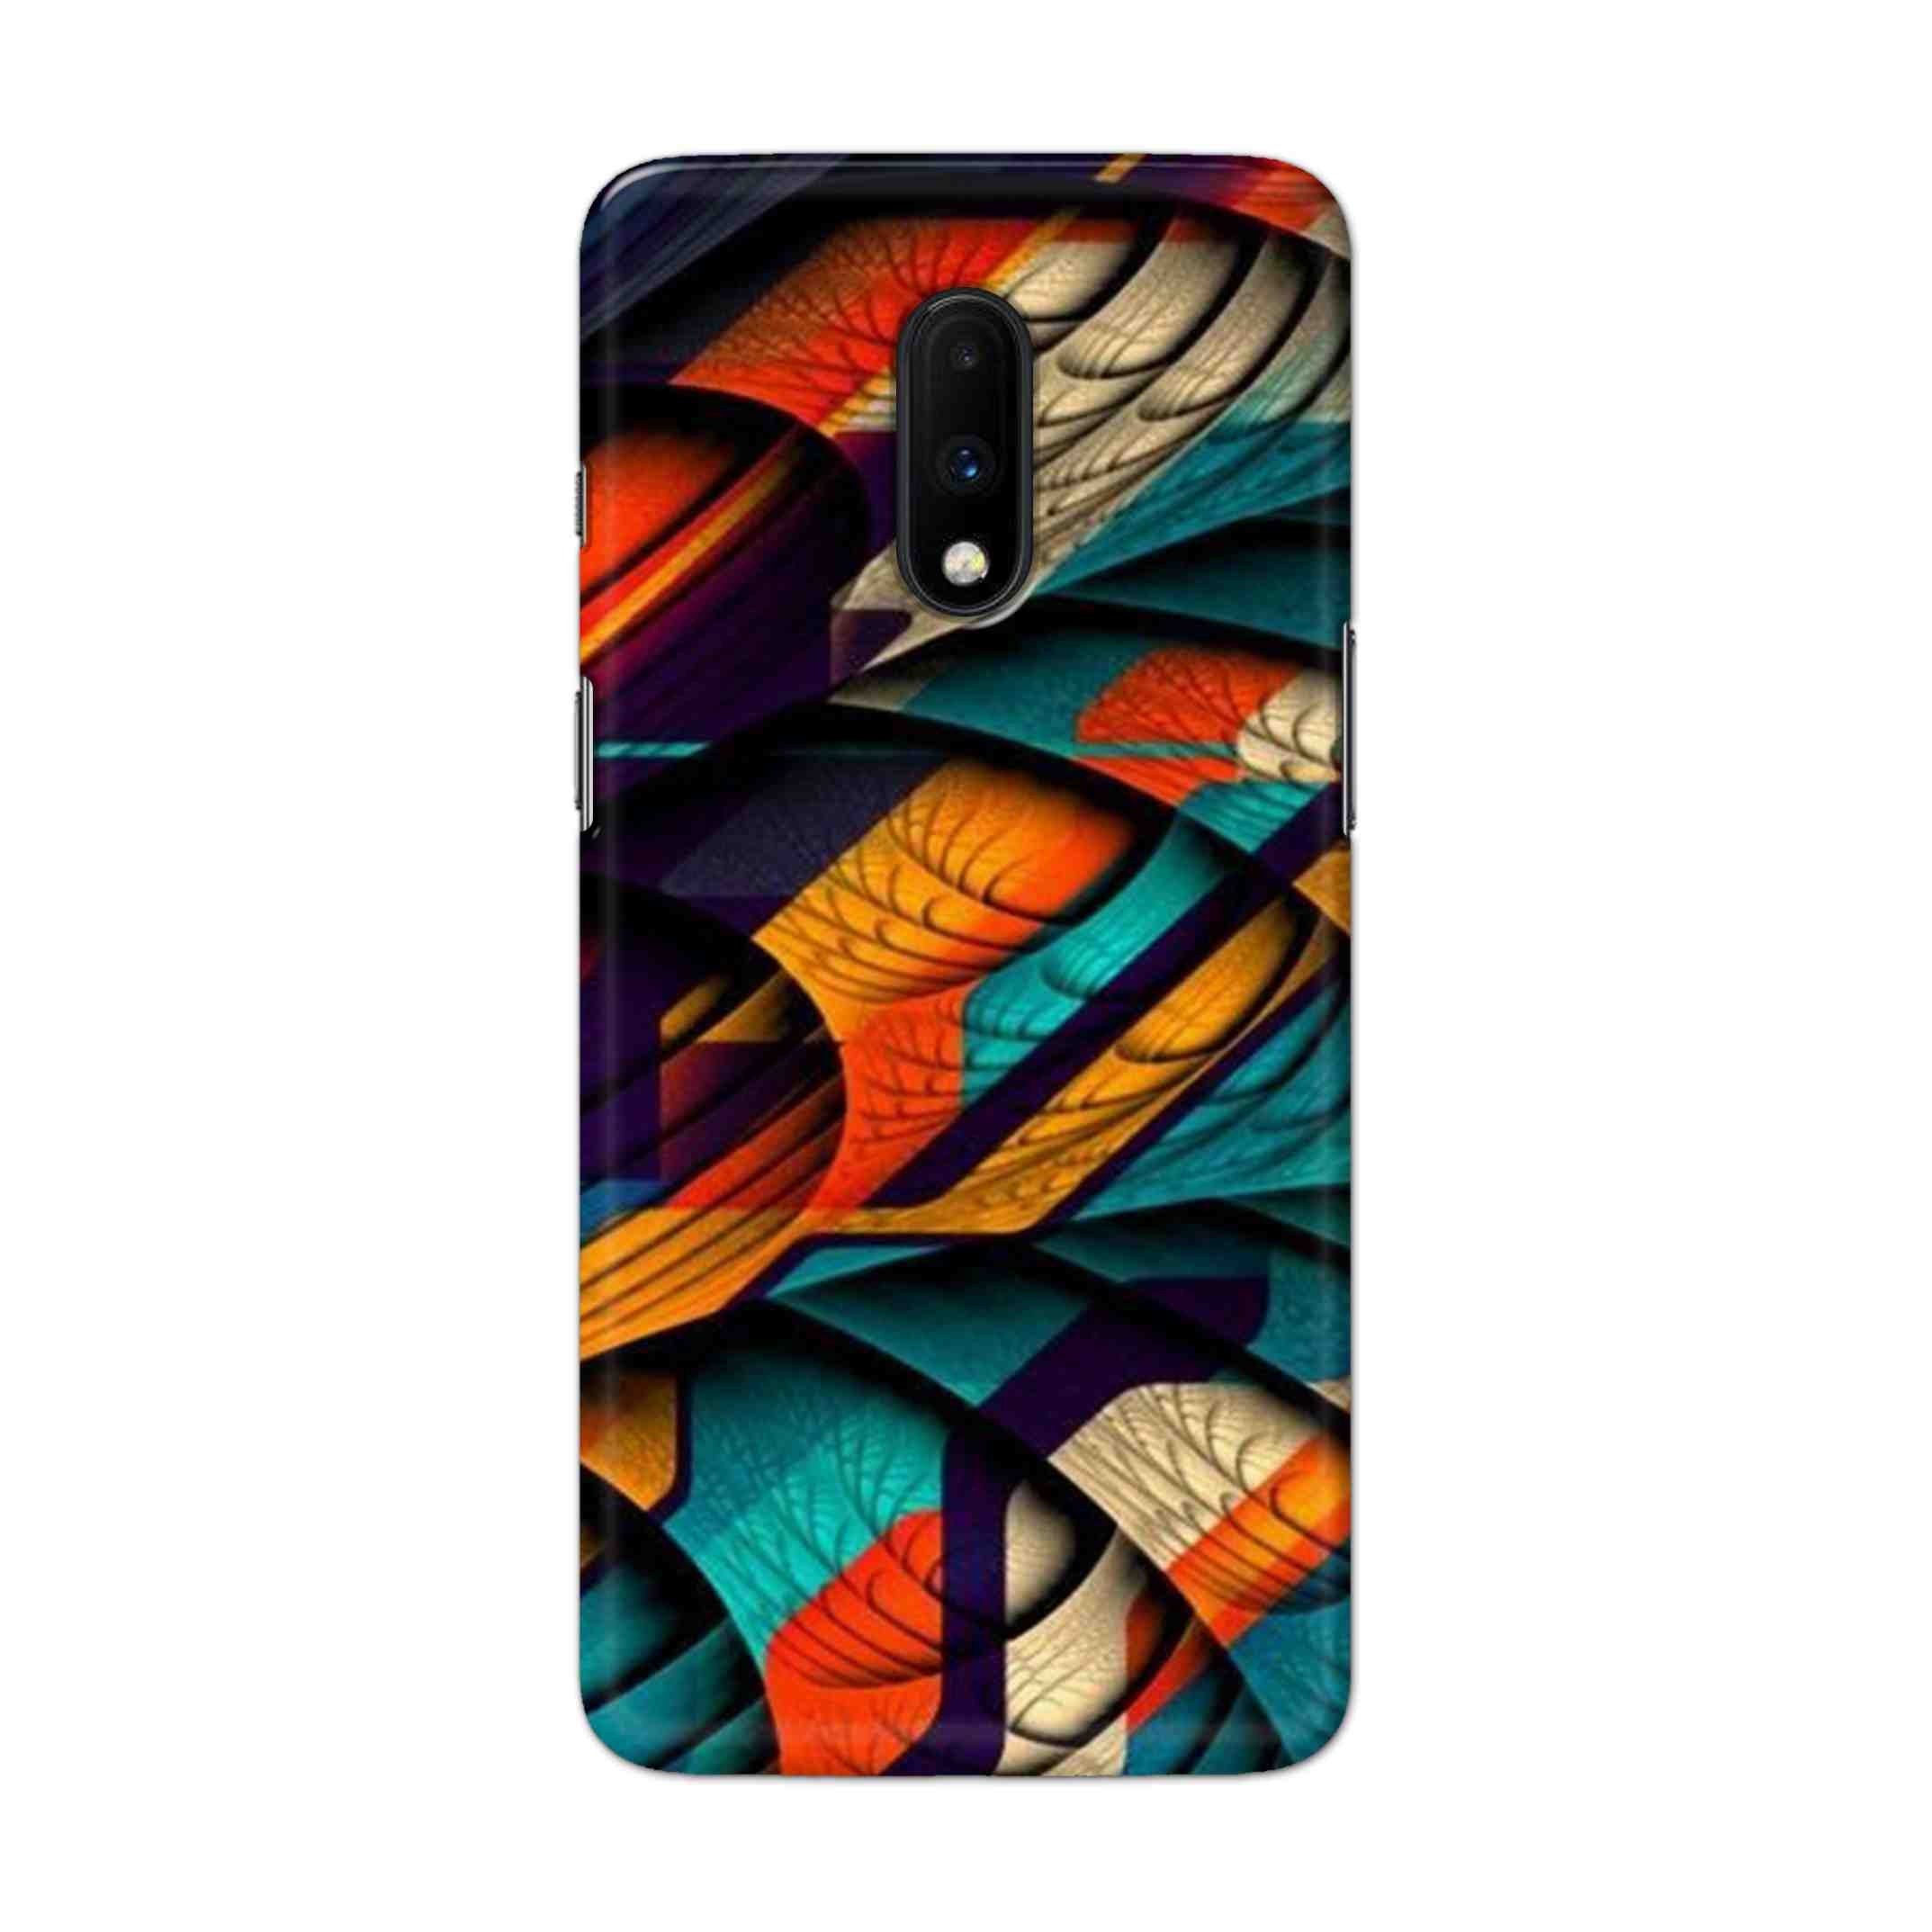 Buy Colour Abstract Hard Back Mobile Phone Case Cover For OnePlus 7 Online